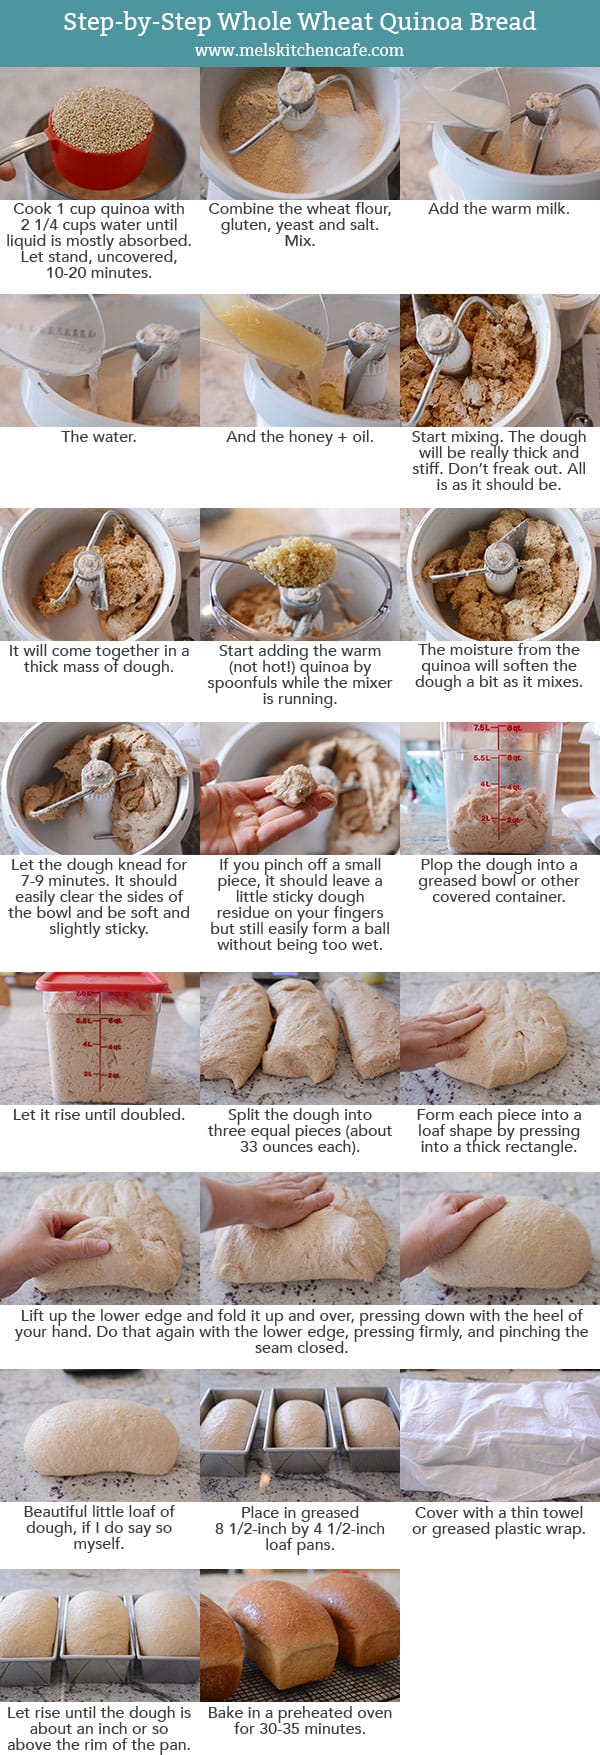 Step-by-step photos and instructions showing how to make homemade quinoa bread.